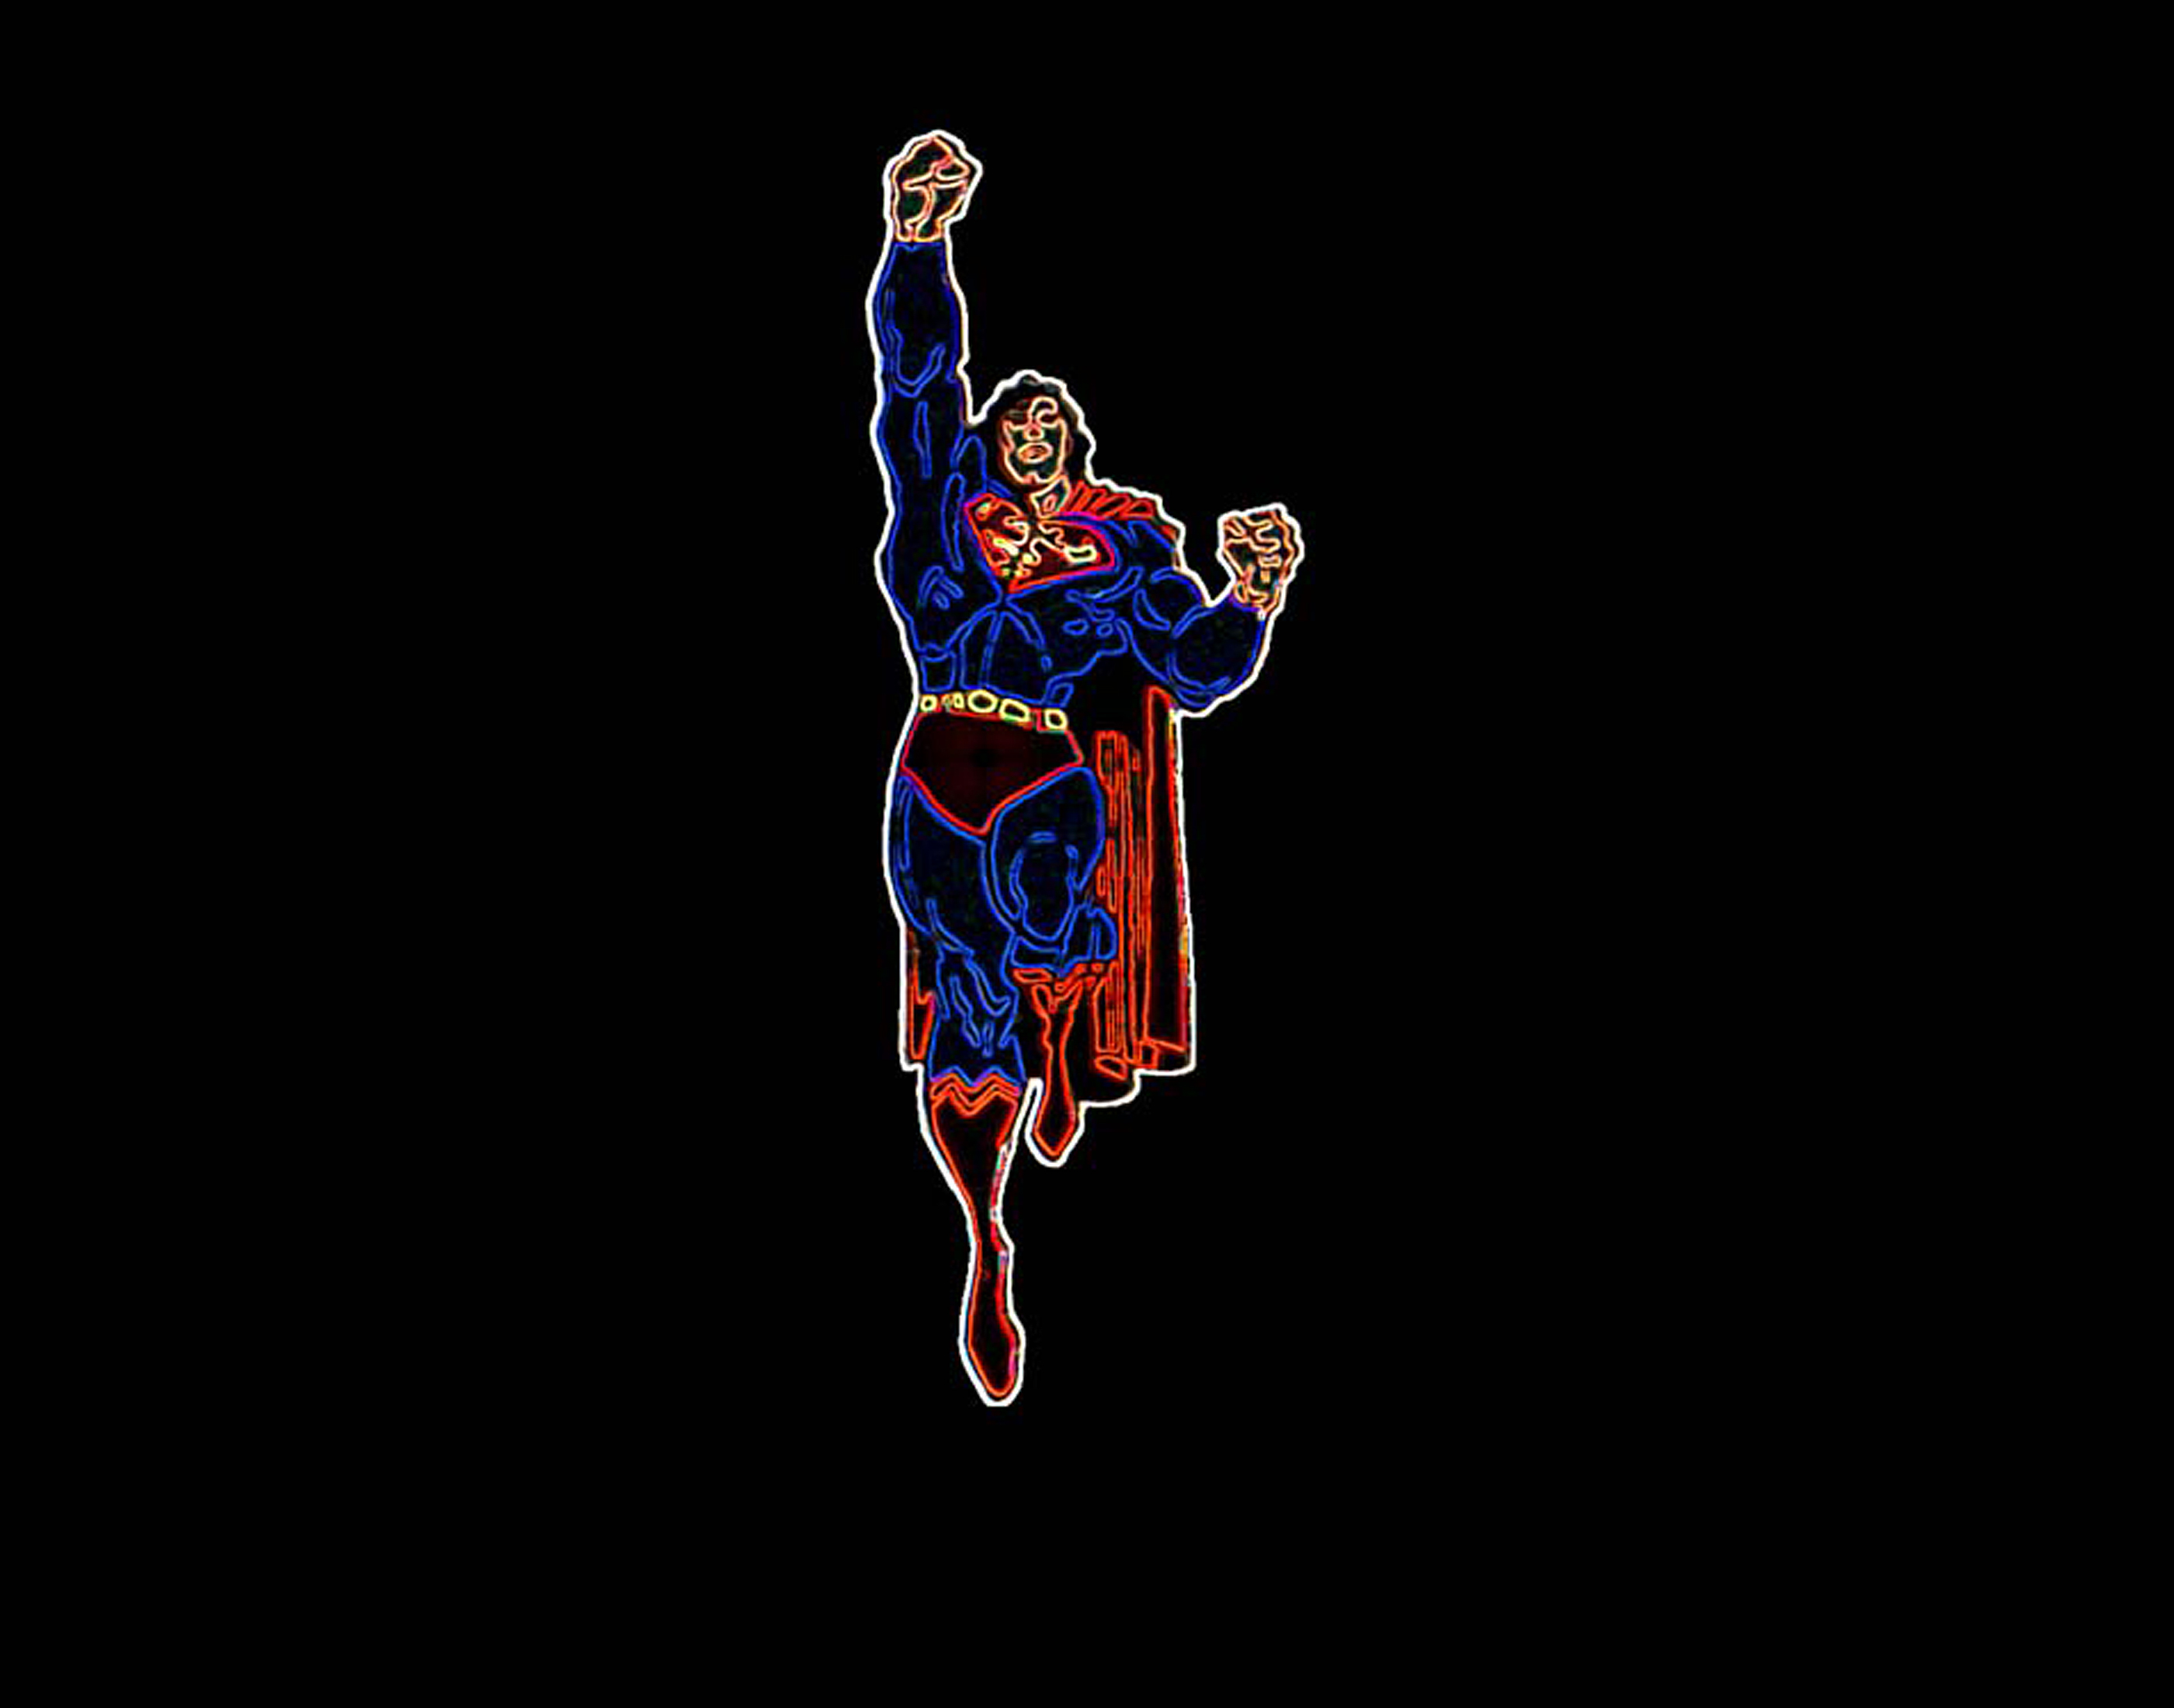 Superman inspired digital artwork with vibrant neon colors against a dark background.